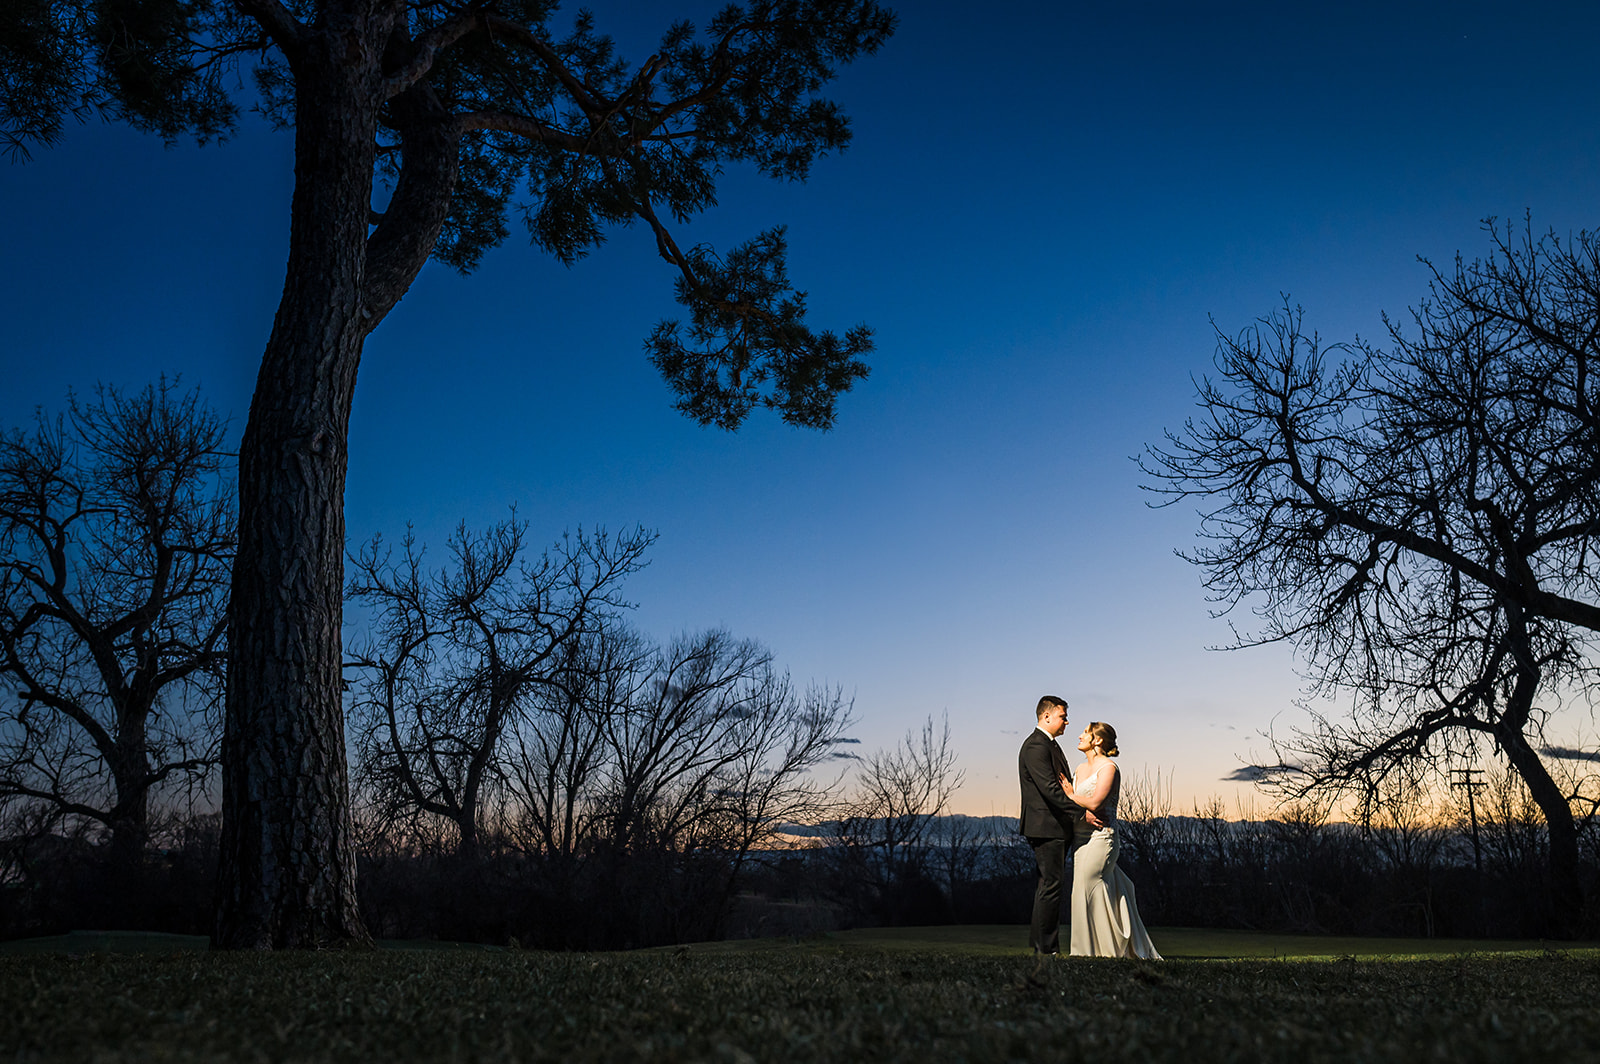 wellshire golf course wedding environment blue hour sunset photo dark and moody and dramatic with trees grass sky